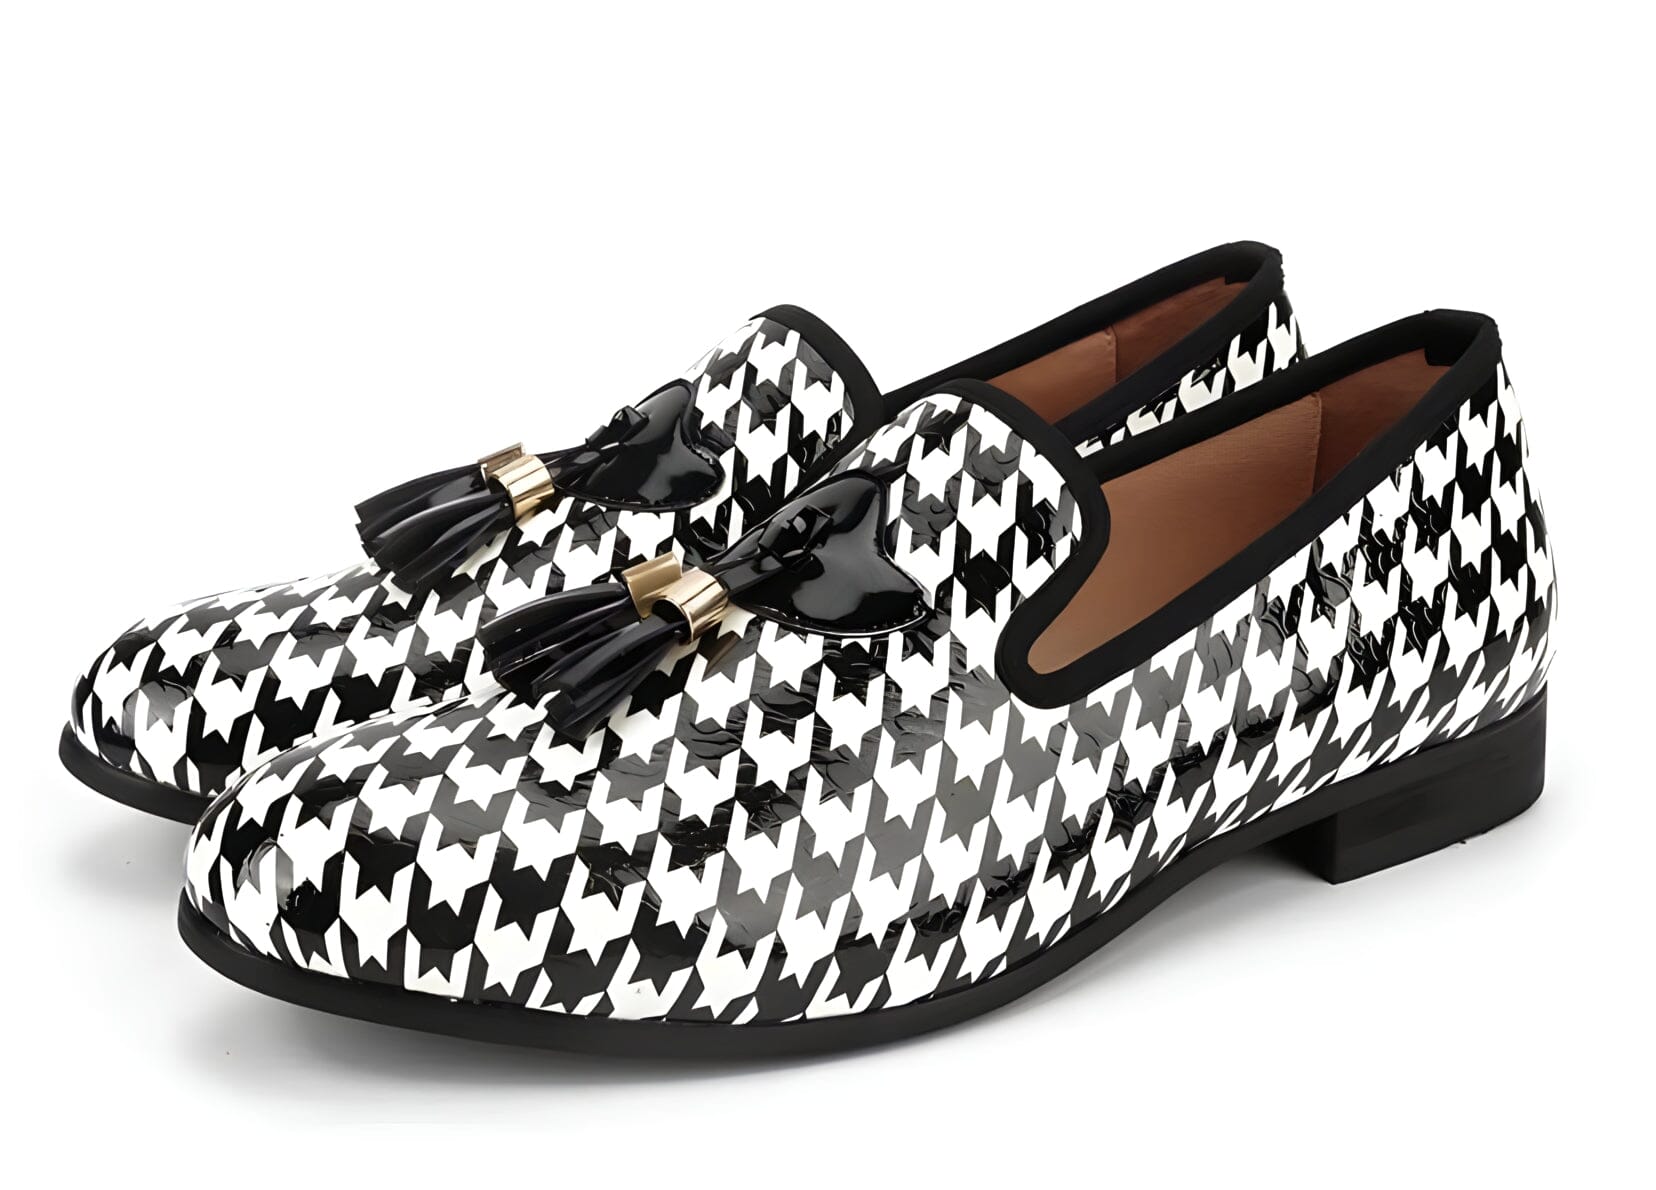 The Houndstooth Patent Leather Tassel Loafers William // David US 5.5 / EU 38.5 